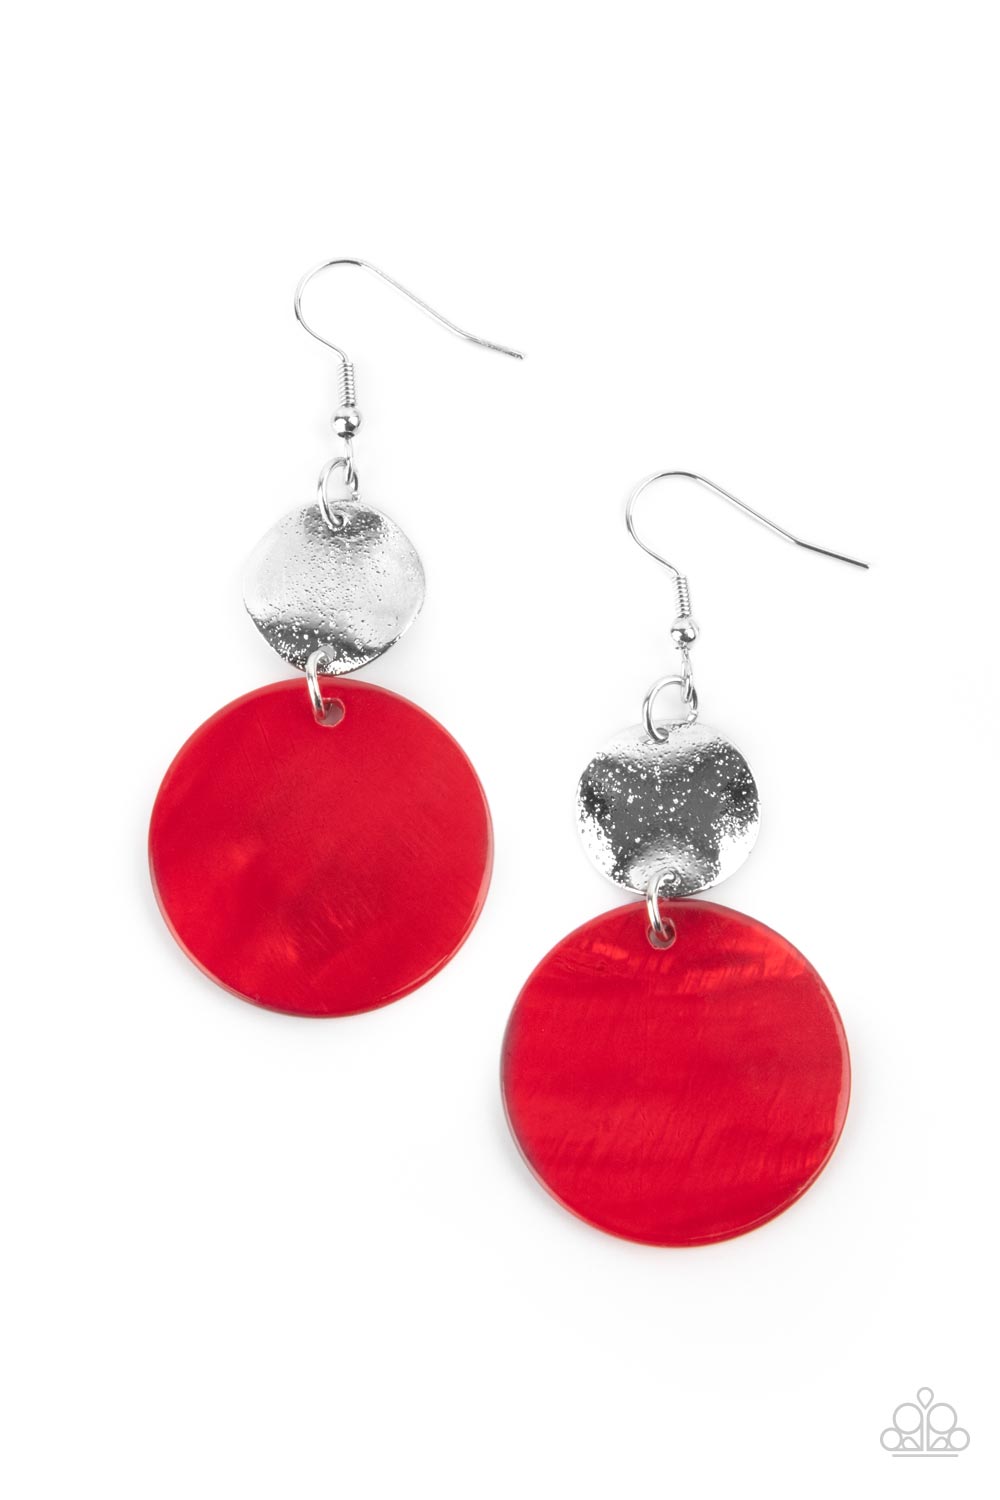 Opulently Oasis - Red and Silver Fashion Earrings - Paparazzi Jewelry - Bejeweled Accessories By Kristie - An oversized shell-like disc is topped by a wavy, sparkling silver disc. Earring attaches to a standard fishhook fitting. Sold as one pair of fashion earrings.